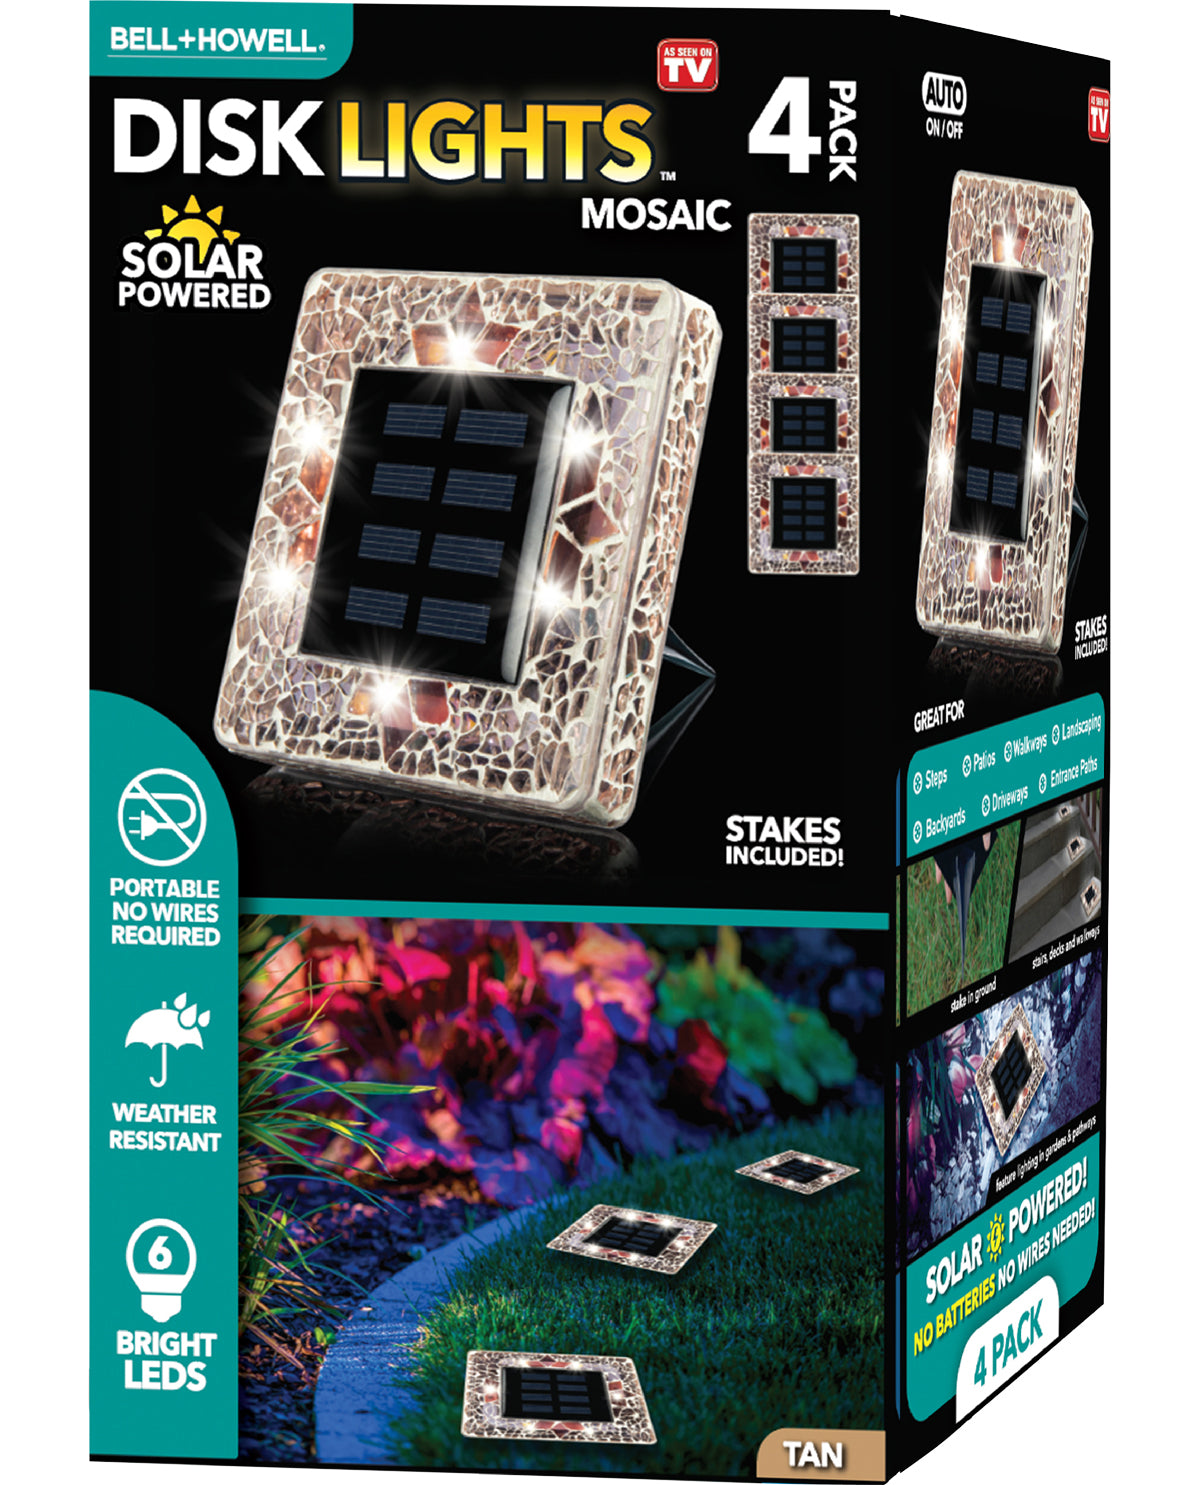 Bell+Howell Solar Powered Square Disk Lights with Light Brown Mosaic Glass (4-Pack)